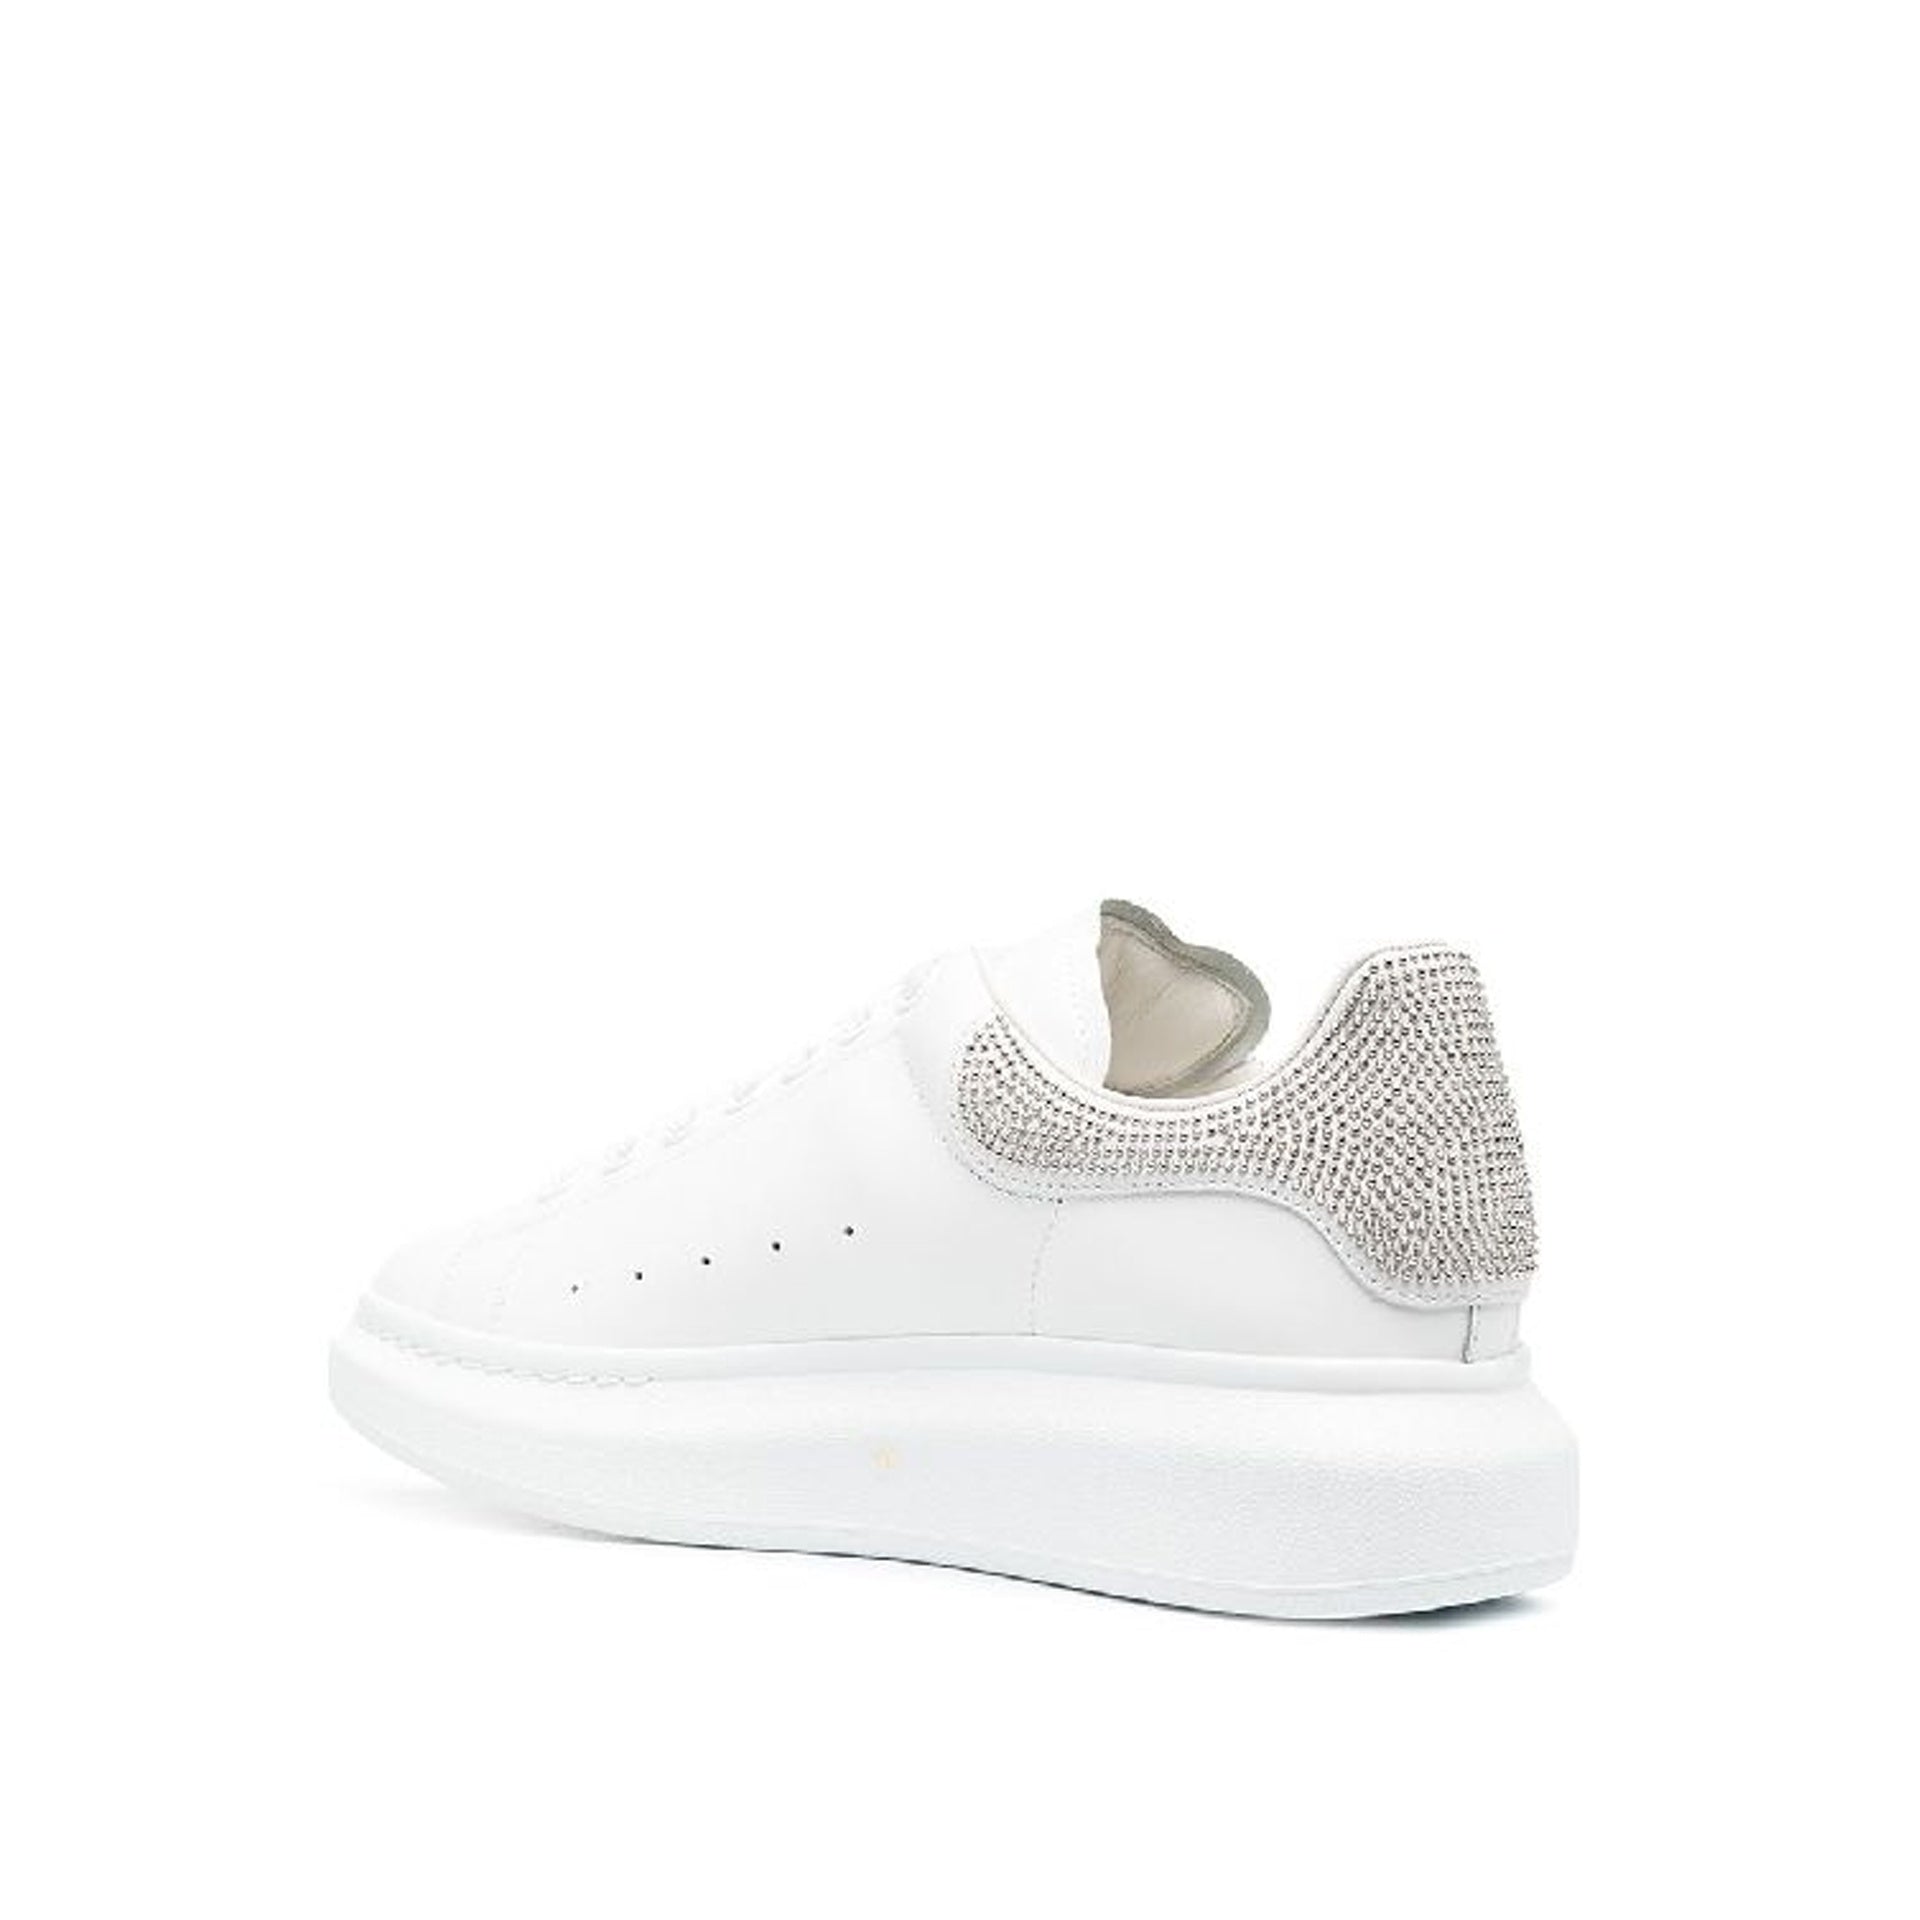 ALEXANDER-MCQUEEN-OUTLET-SALE-Alexander-McQueen-Studded-Oversized-Sneakers-Sneakers-WHITE-49-ARCHIVE-COLLECTION-3.jpg